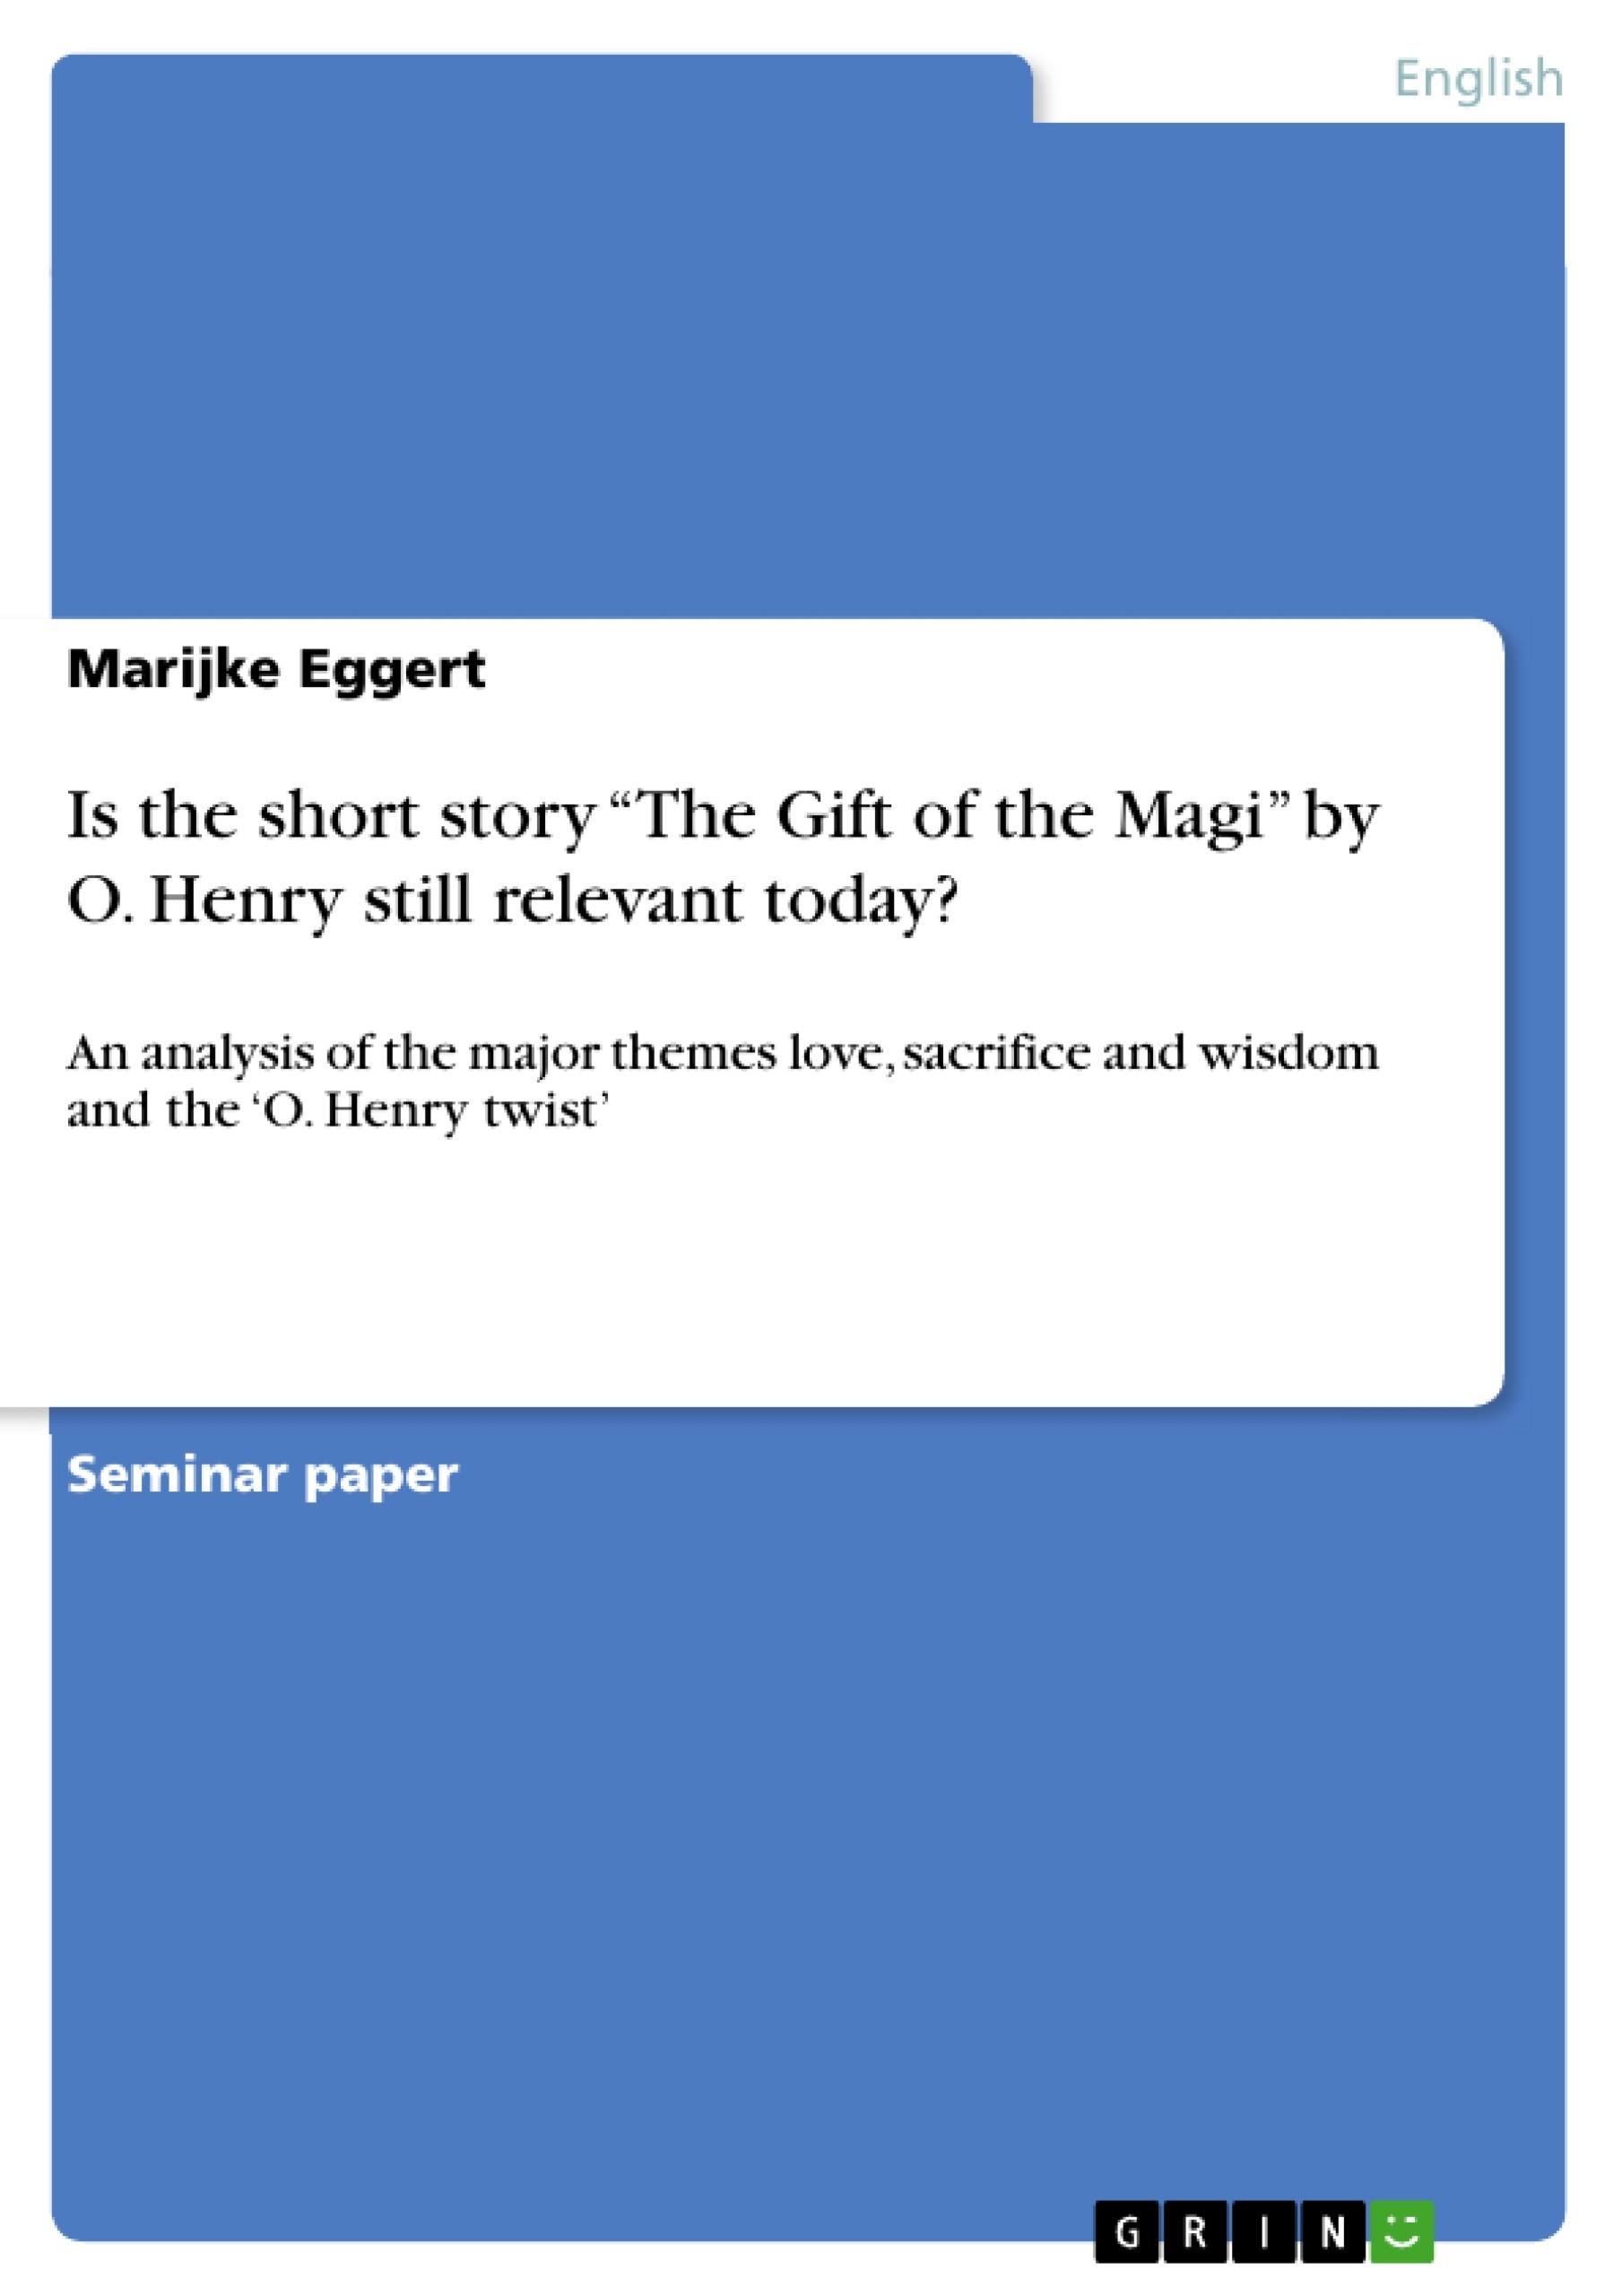 Is the short story “The Gift of the Magi” by O. Henry still relevant today?  Hausarbeiten publizieren